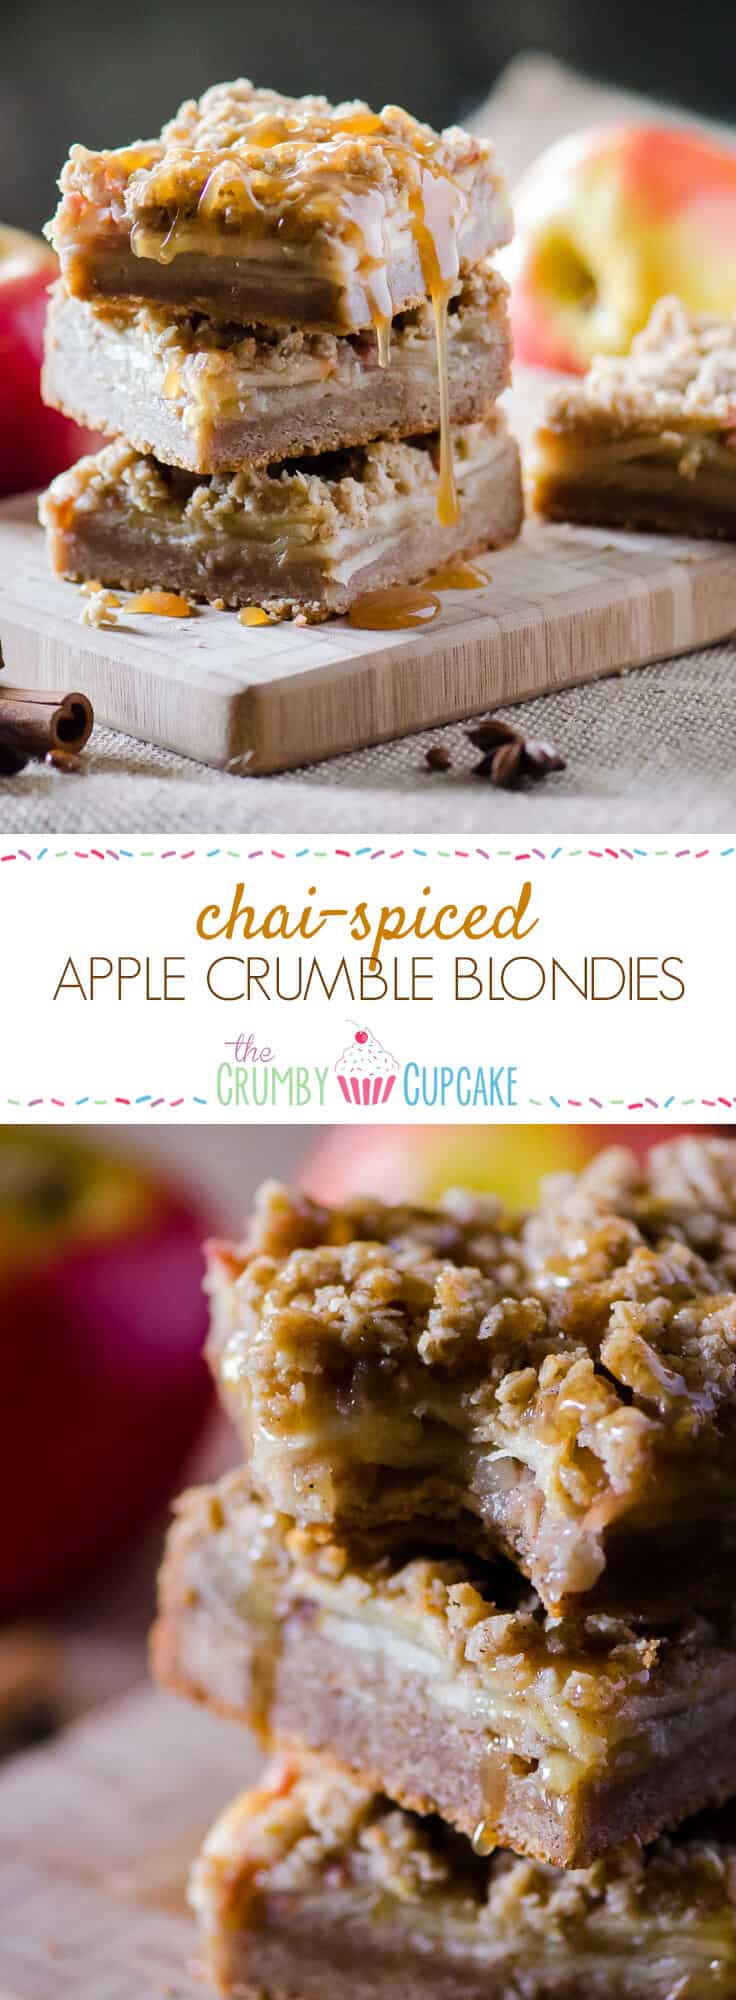 Blondies, fall style! Chai-Spiced Apple Crumble Blondies combine the flavors of the season with the brownie's brown sugared-little sister.